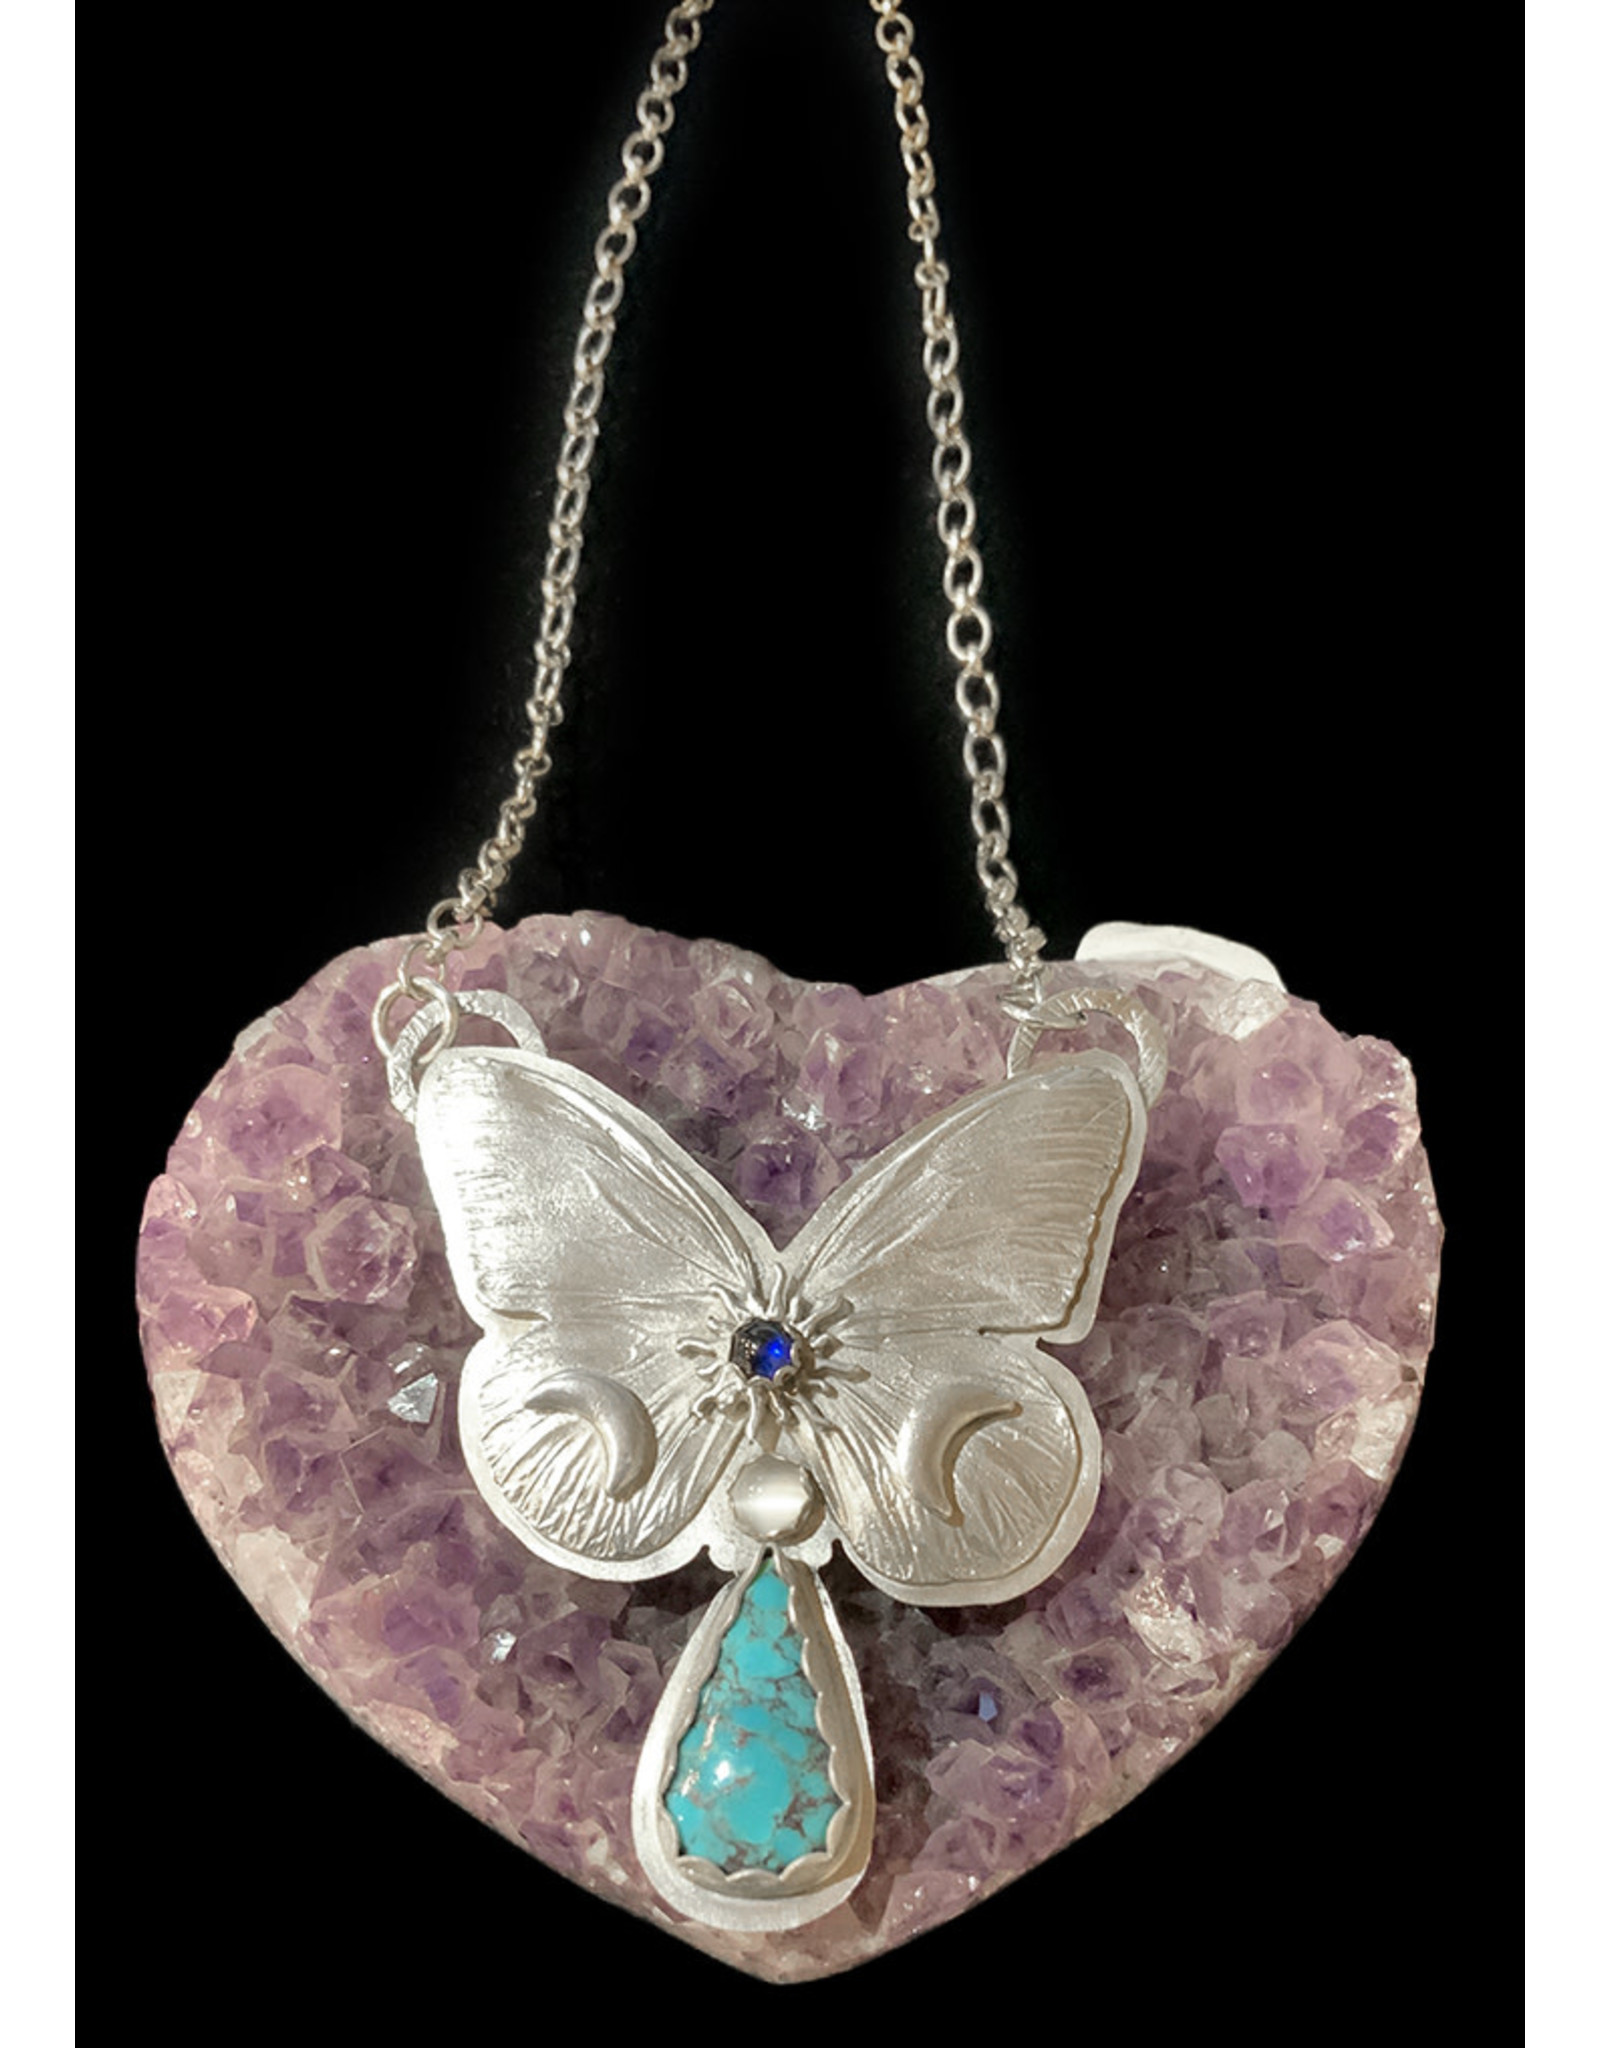 Annette Colby - Jeweler Butterfly Necklace w/ Turquoise Moonstone Sapphire - Annette Colby